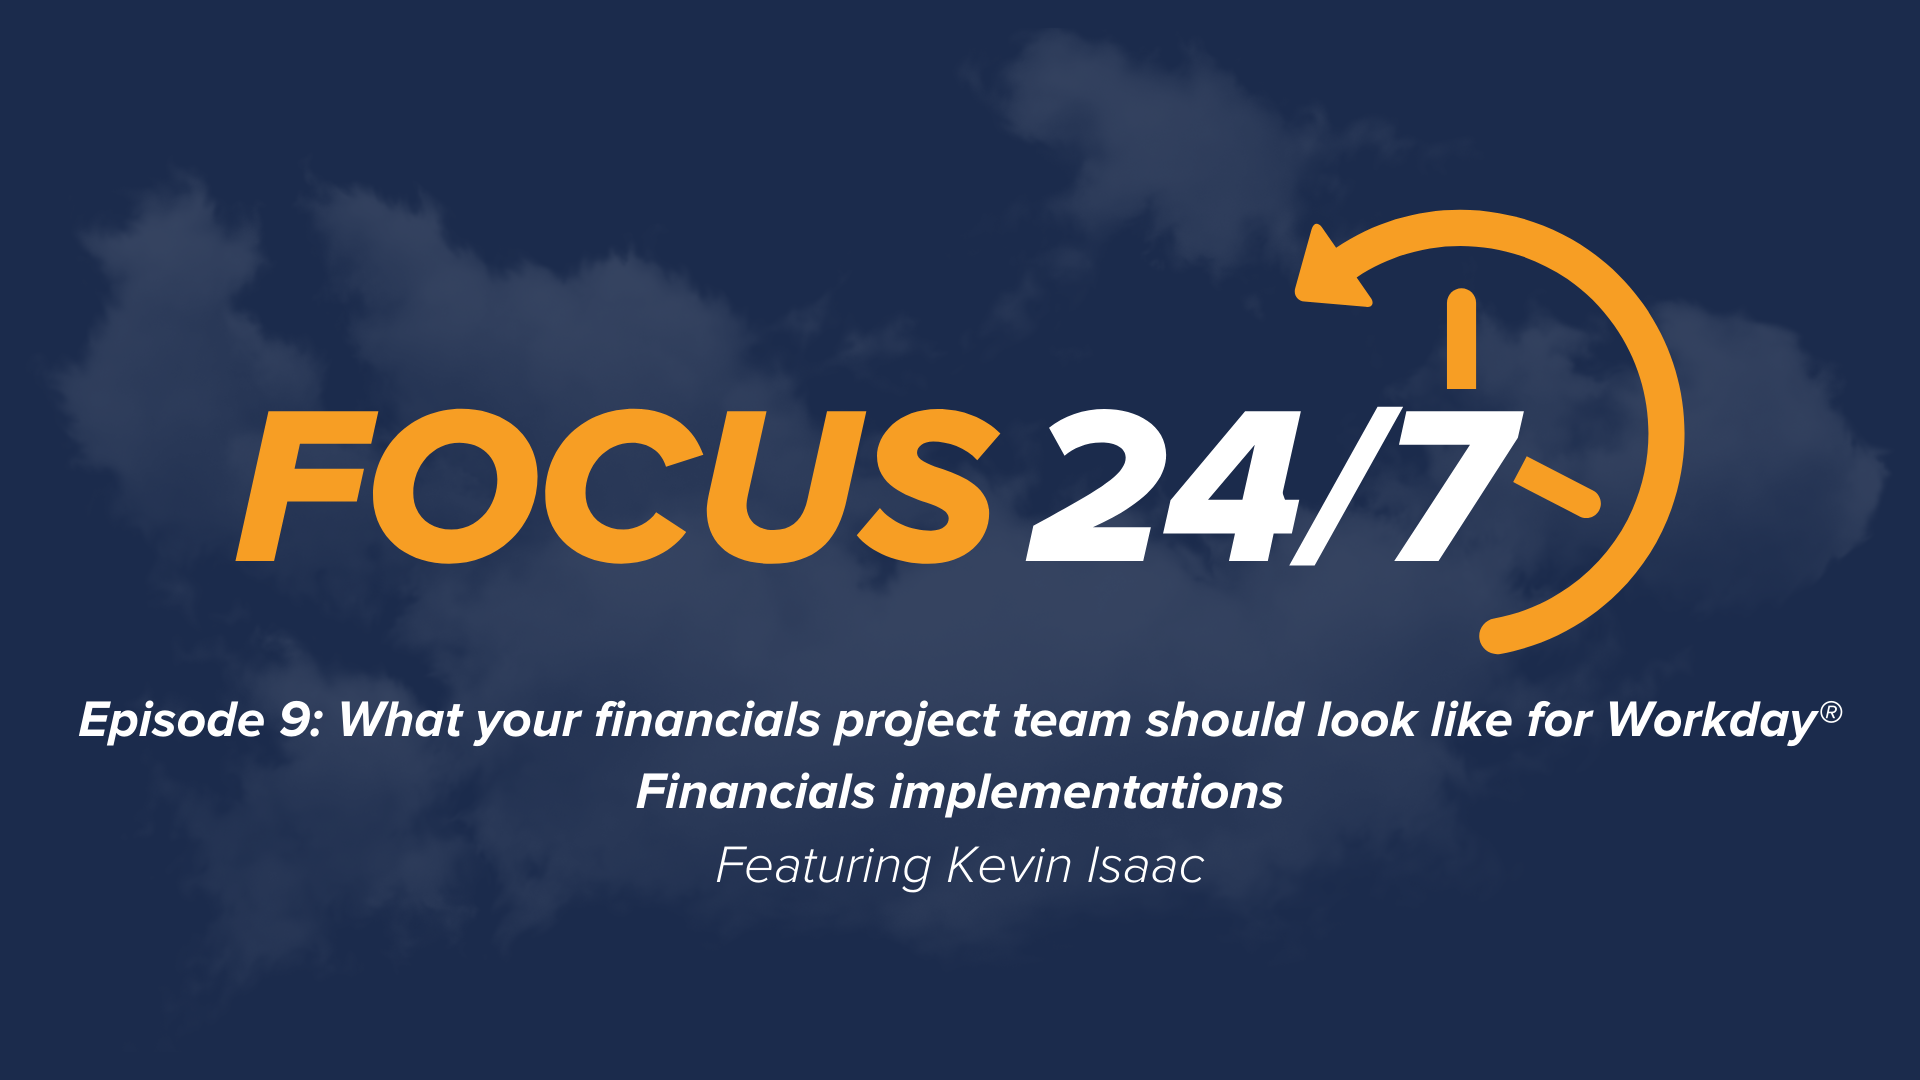 Focus 24/7 | Episode #9 | - What your financials project team should look like for Workday® Financials implementations